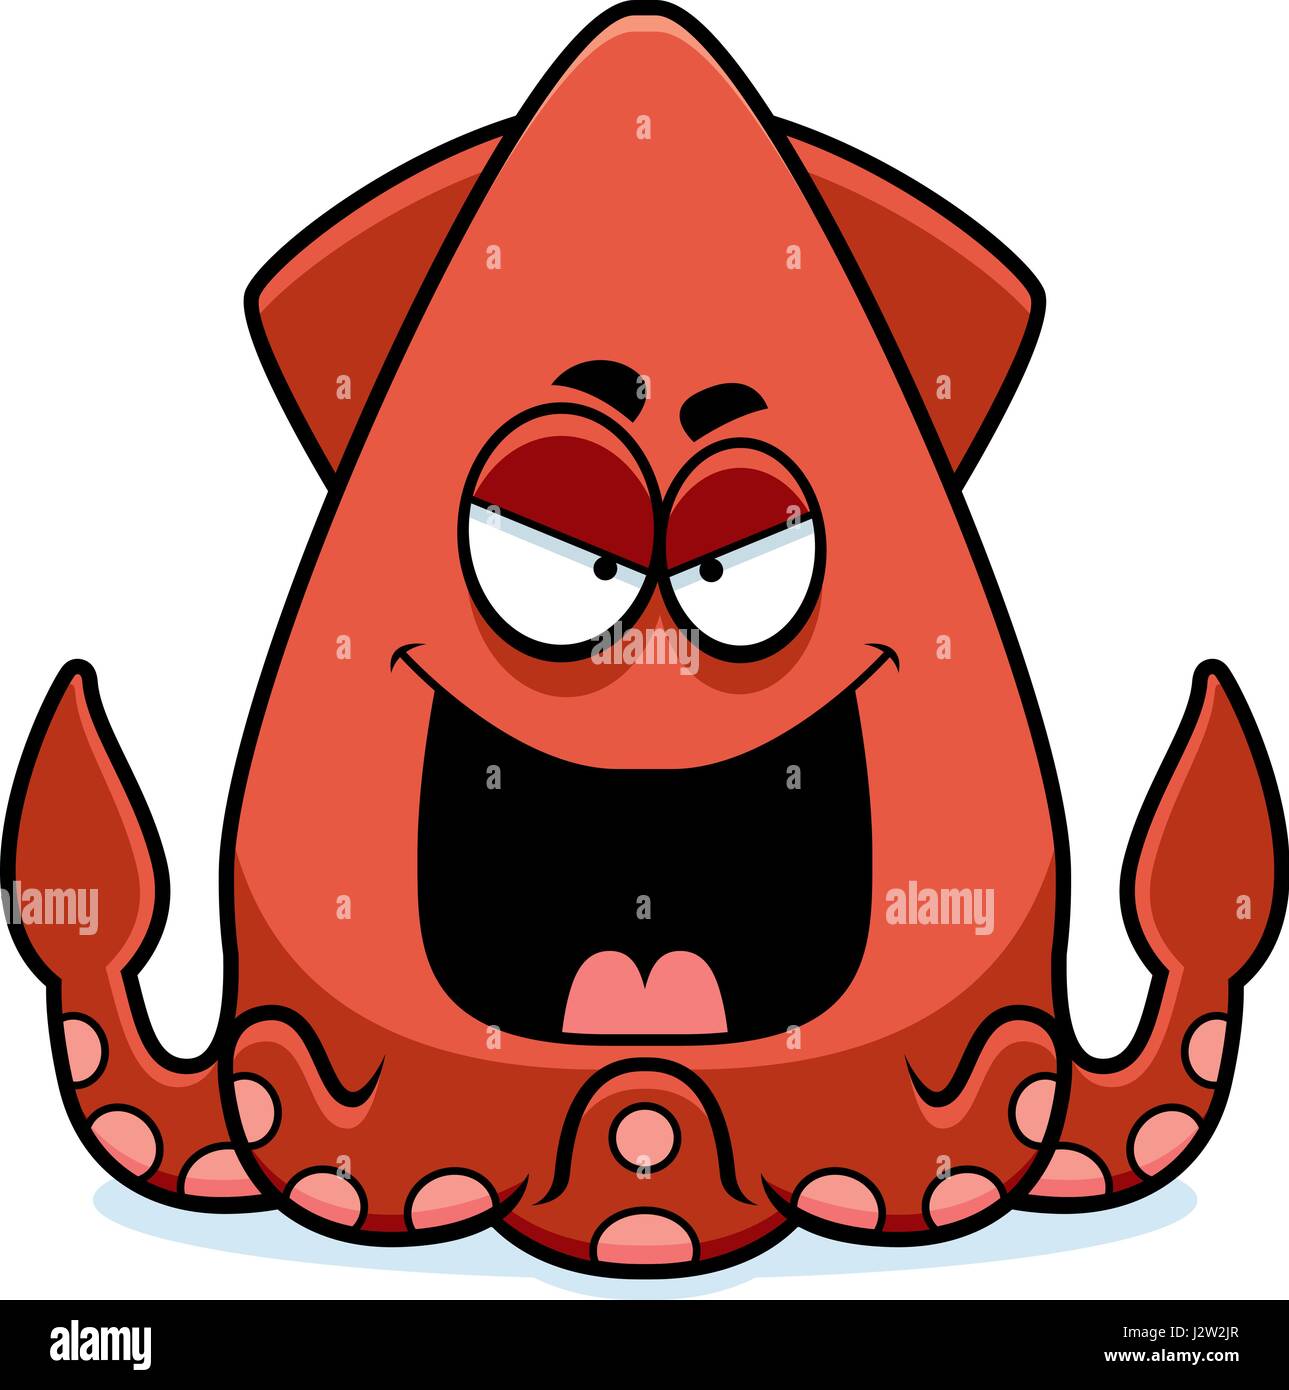 Look Out That Angry Squid Can Stock Vector (Royalty Free) 1339287239